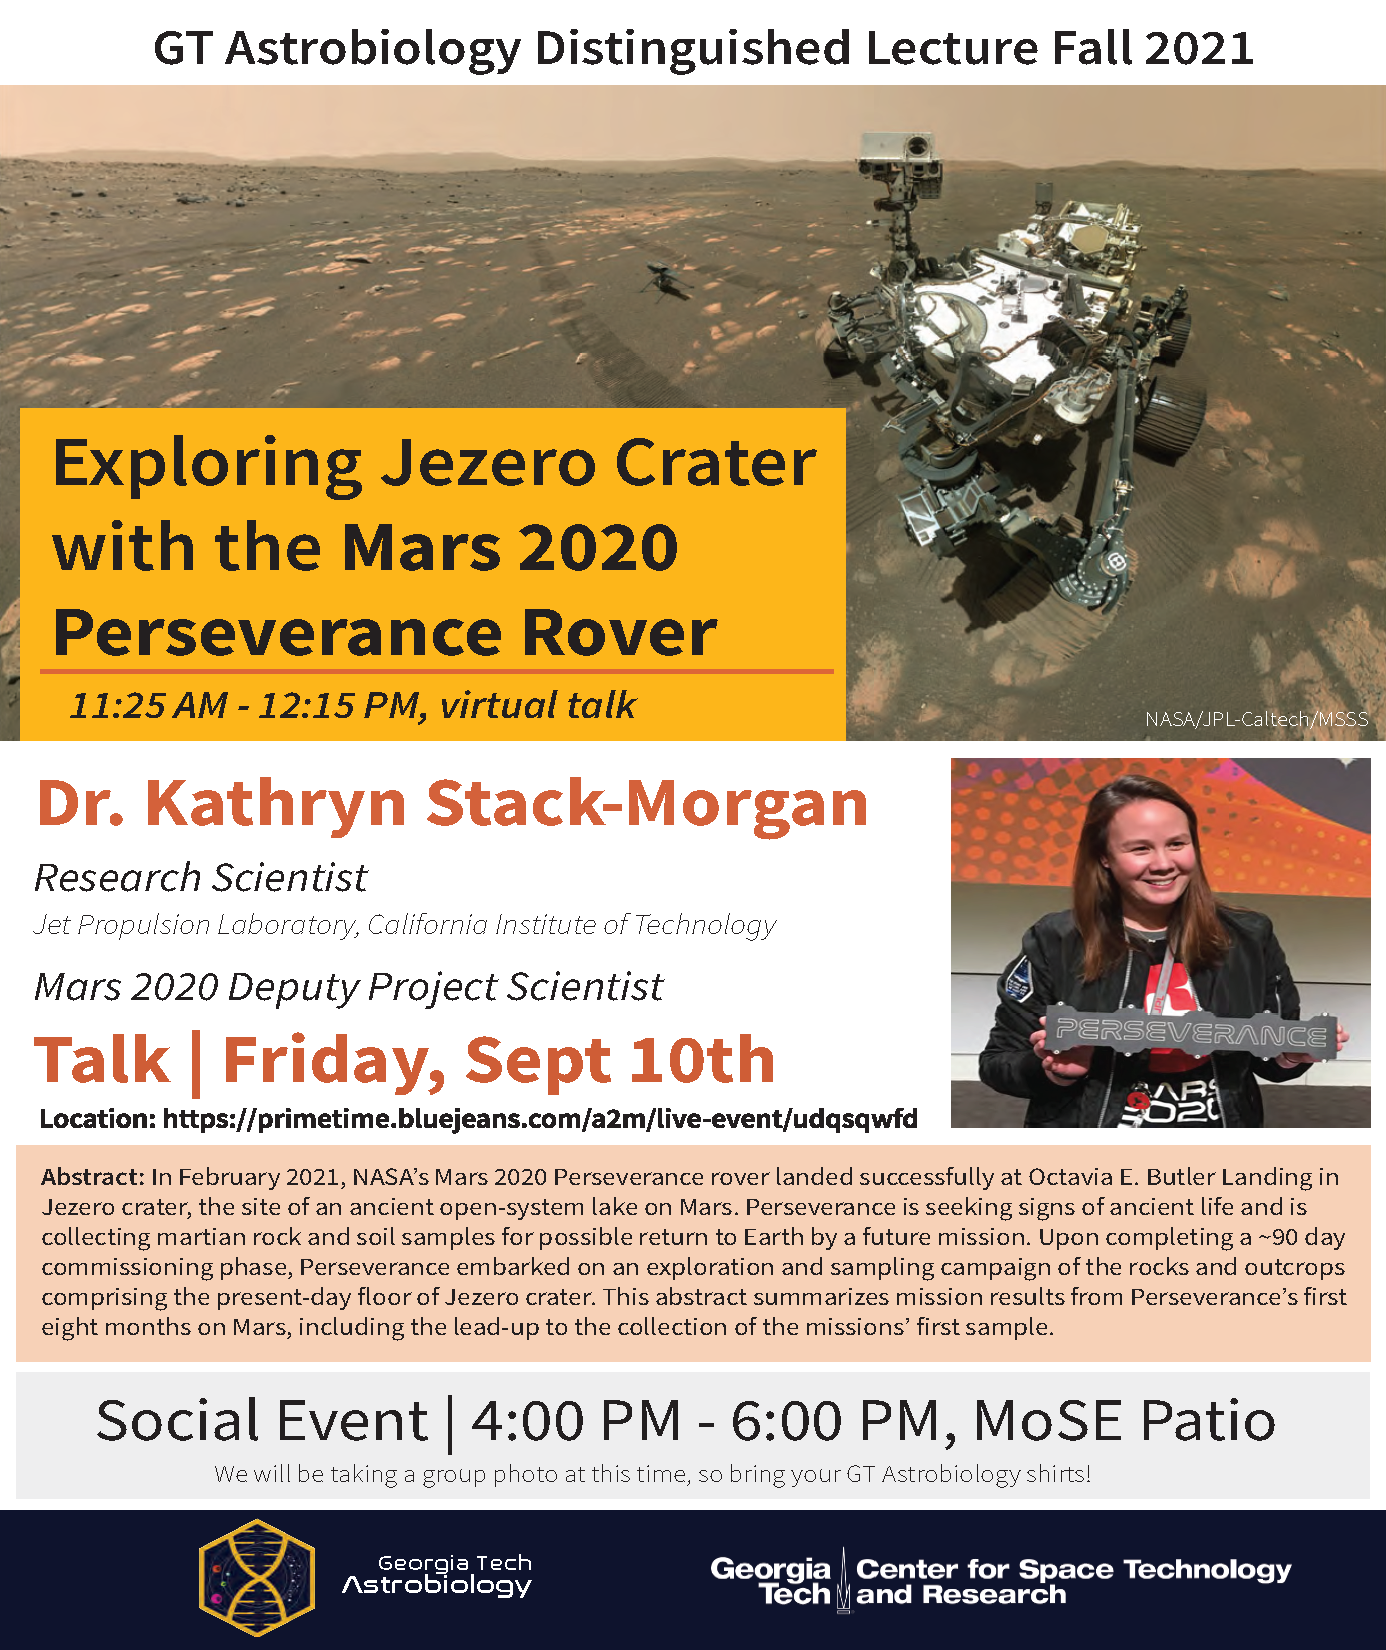 Fall 2021 GT Astrobiology Distinguished Lecture and Social Event flyer 